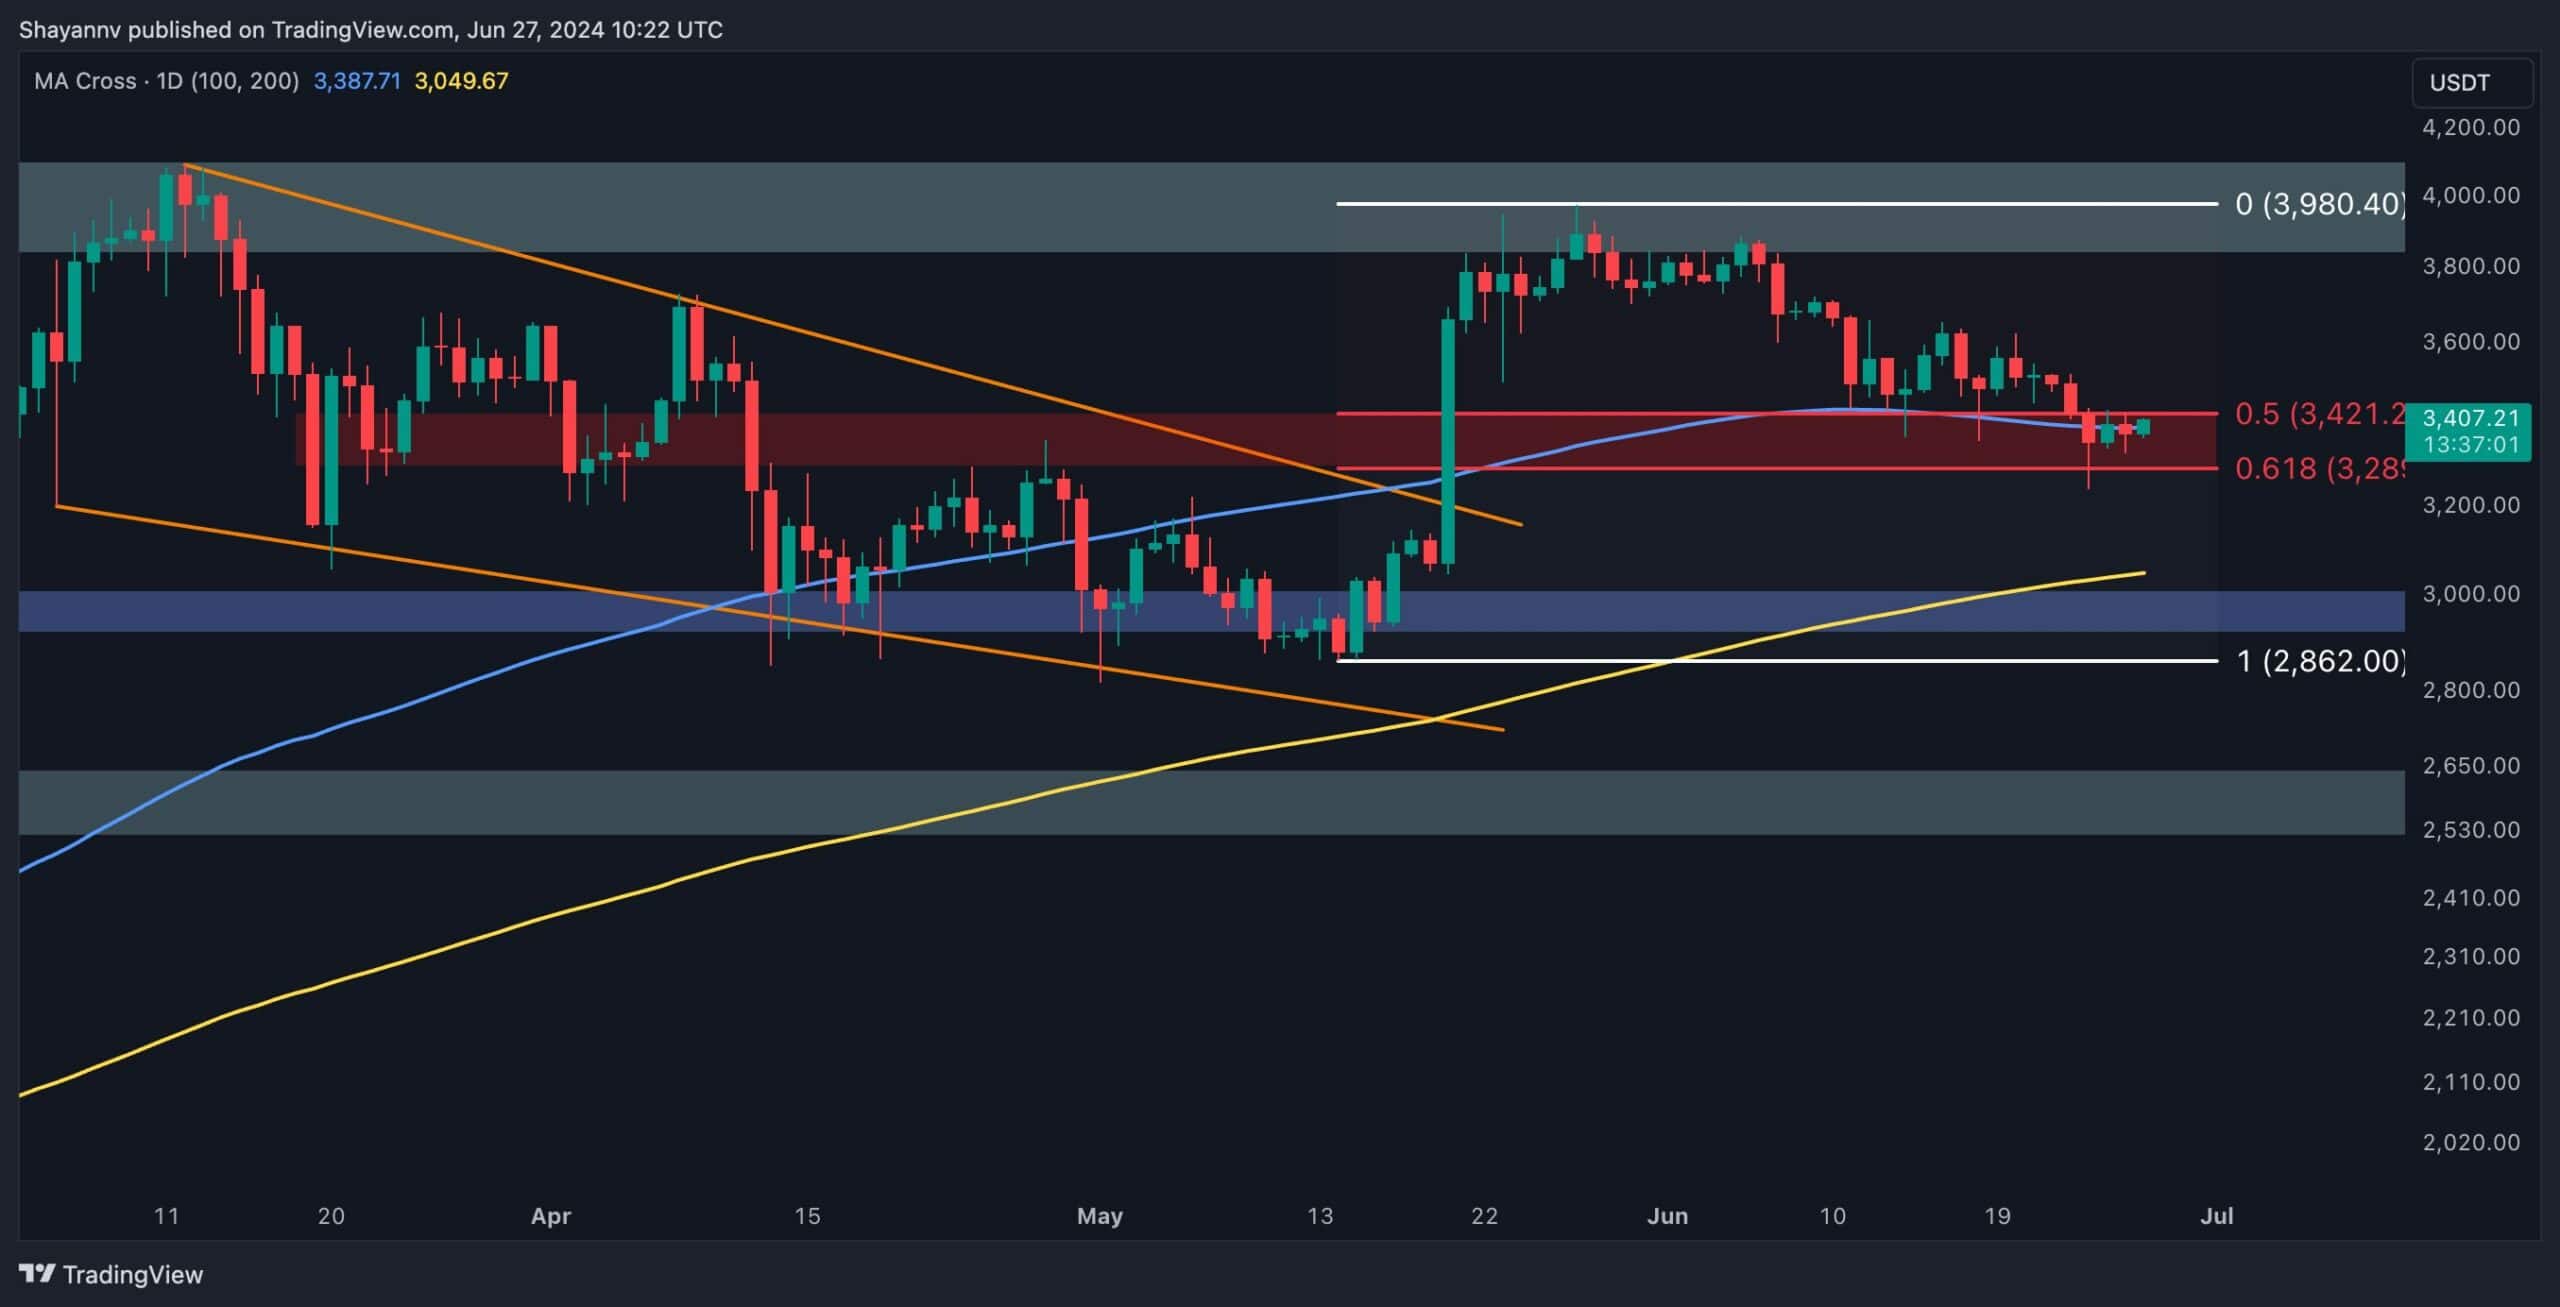 After a bearish correction phase, the price has now reached a crucial support zone, defined by the 100-day moving average and the 0.5-0.618 Fibonacci levels. Given the strong demand at this juncture, a mid-term bullish rebound is looking likely. Technical Analysis By Shayan The Daily Chart A detailed examination of the daily chart reveals that